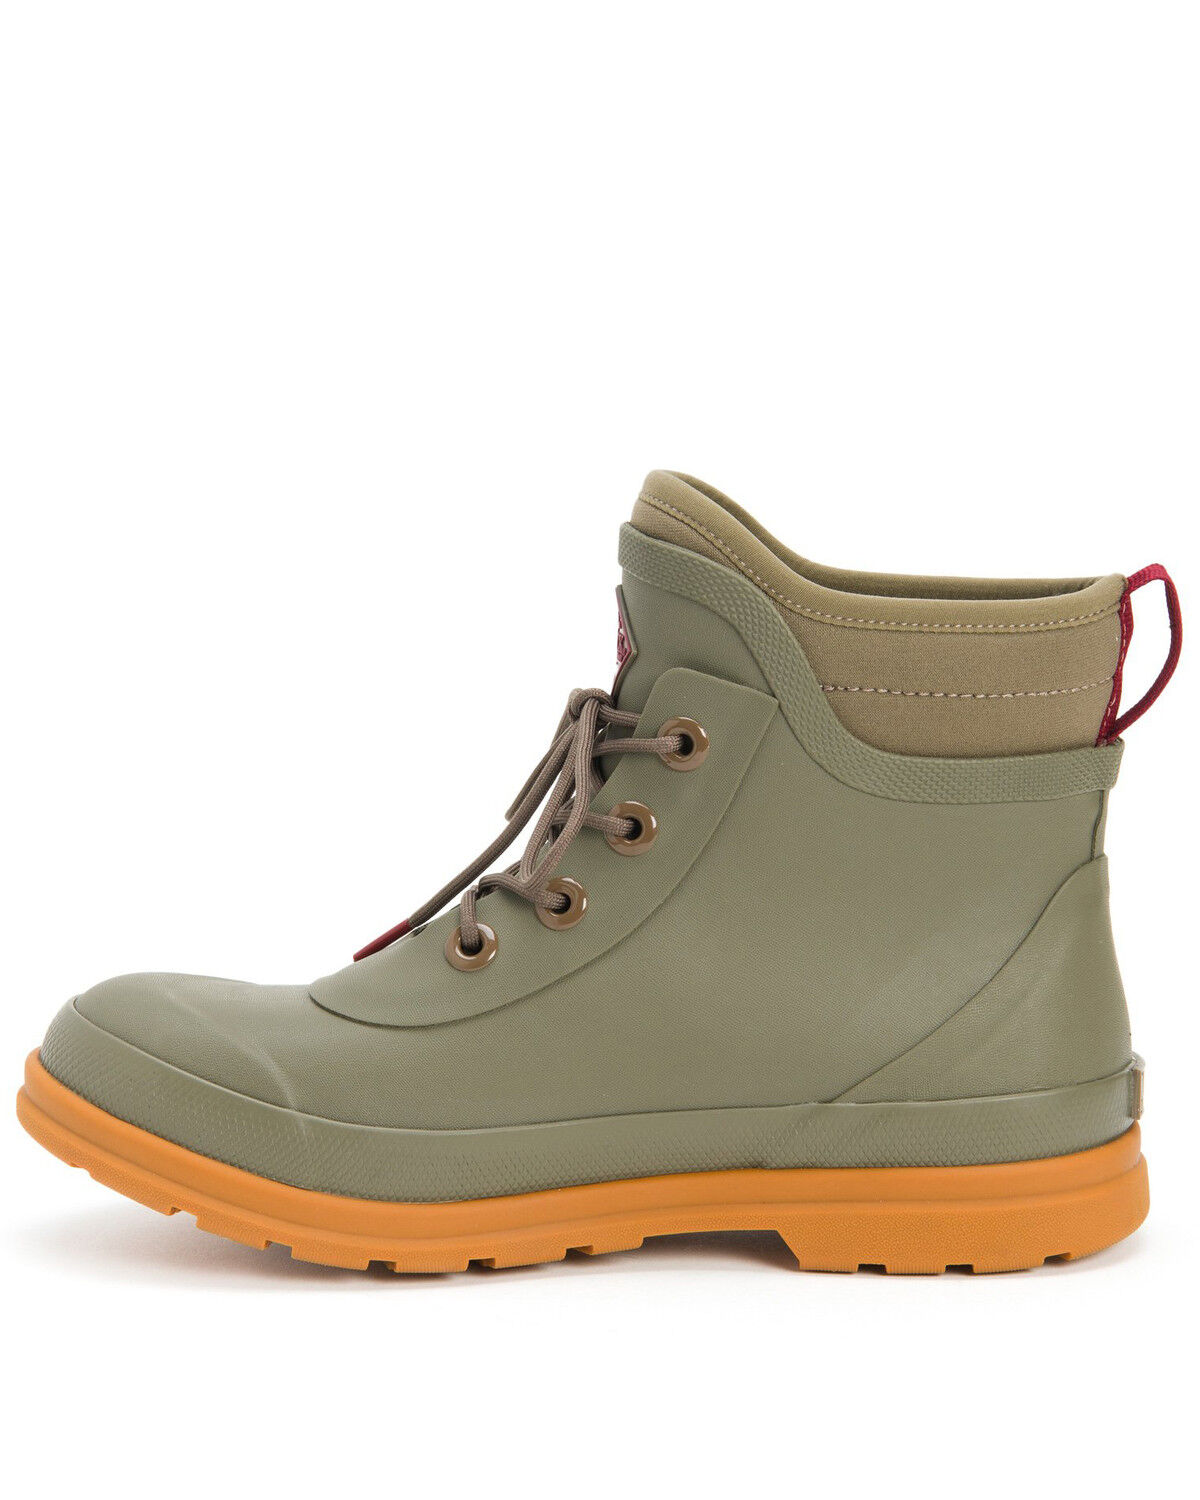 women's lace up muck boots